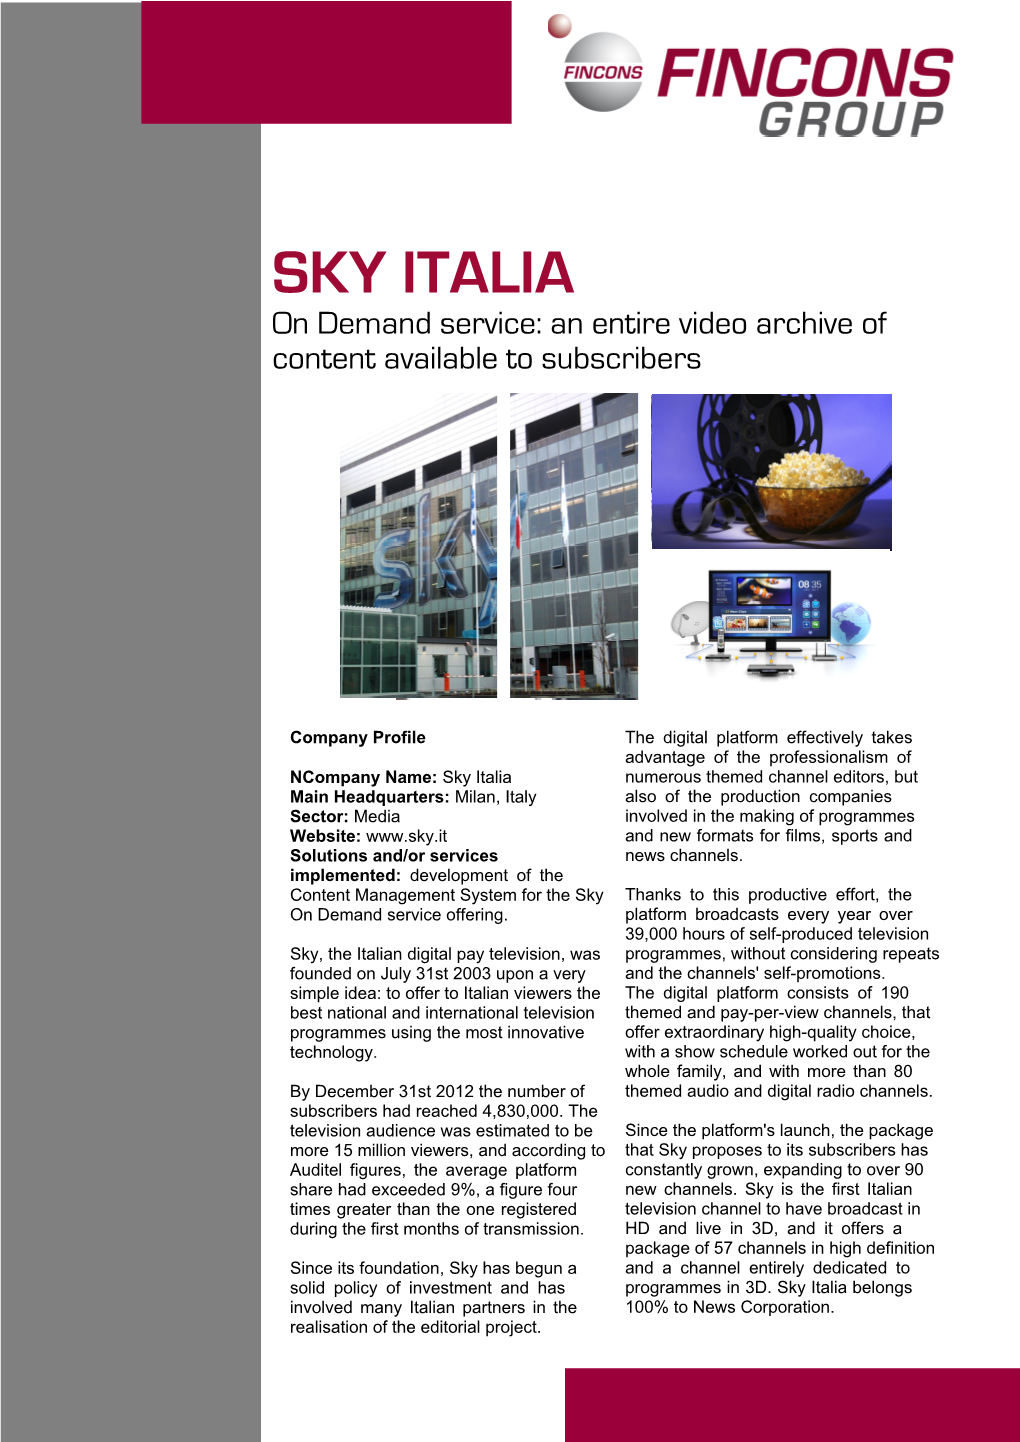 SKY ITALIA on Demand Service: an Entire Video Archive of Content Available to Subscribers